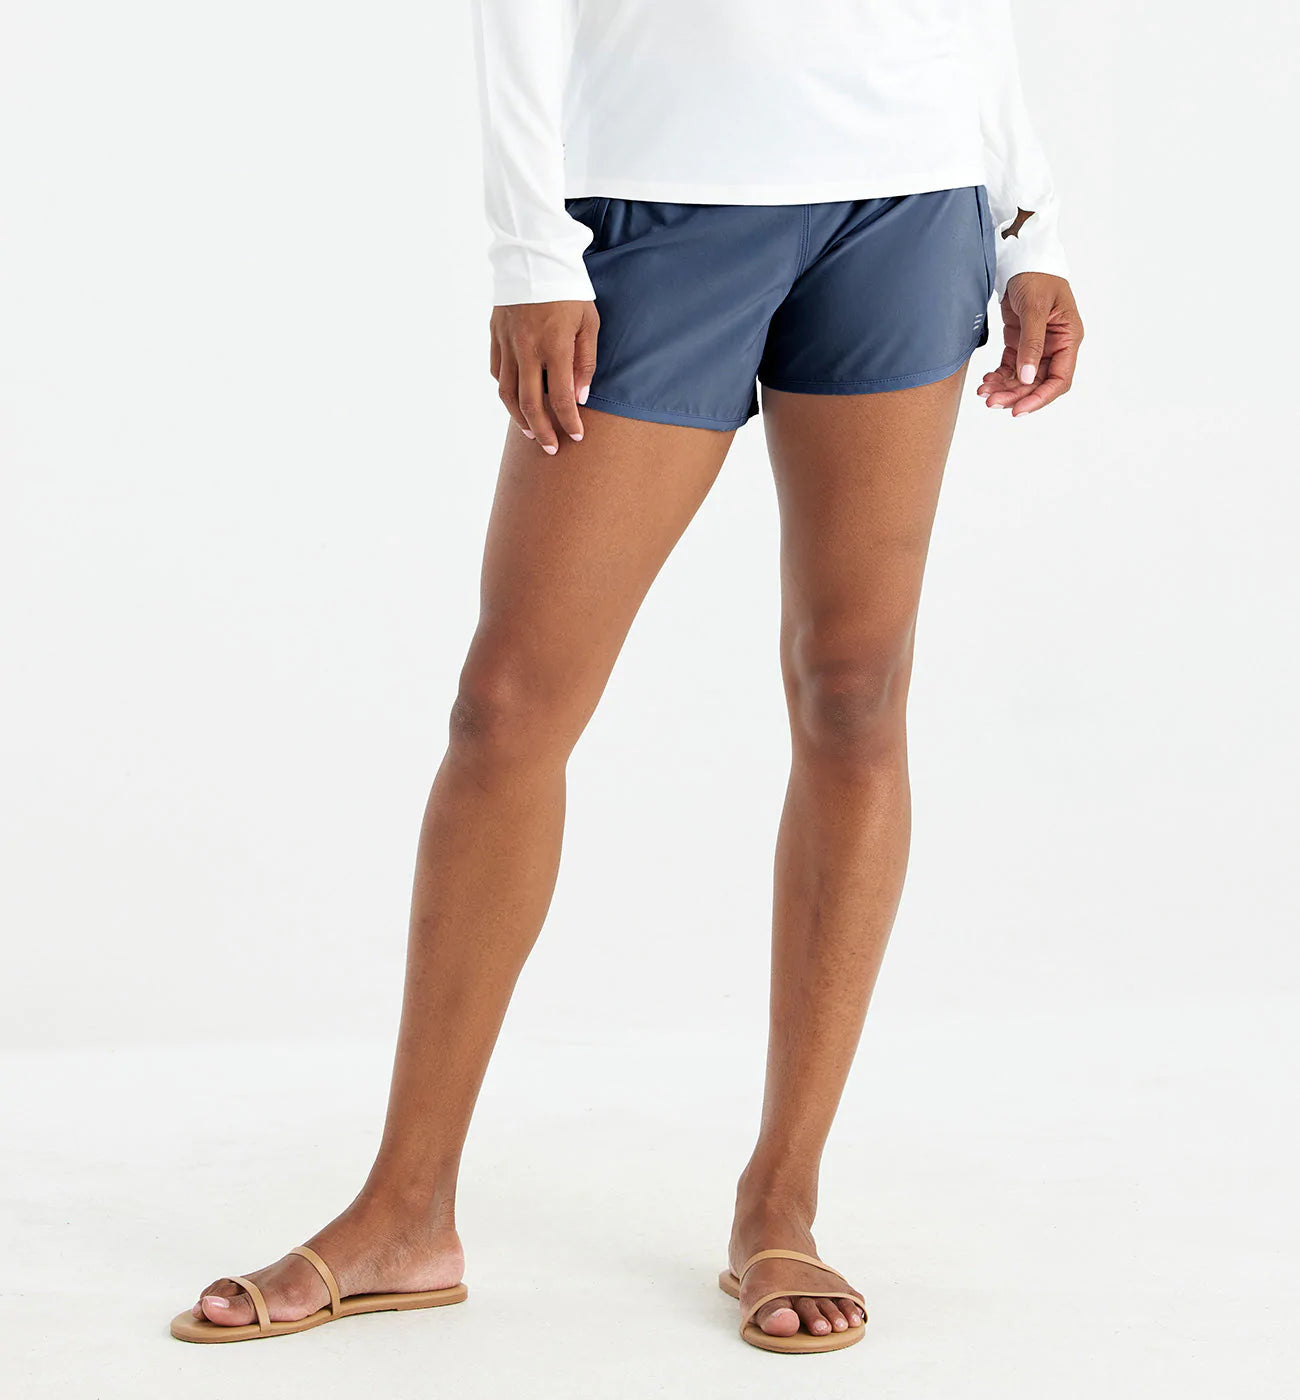 Women's Bamboo Lined Shorts